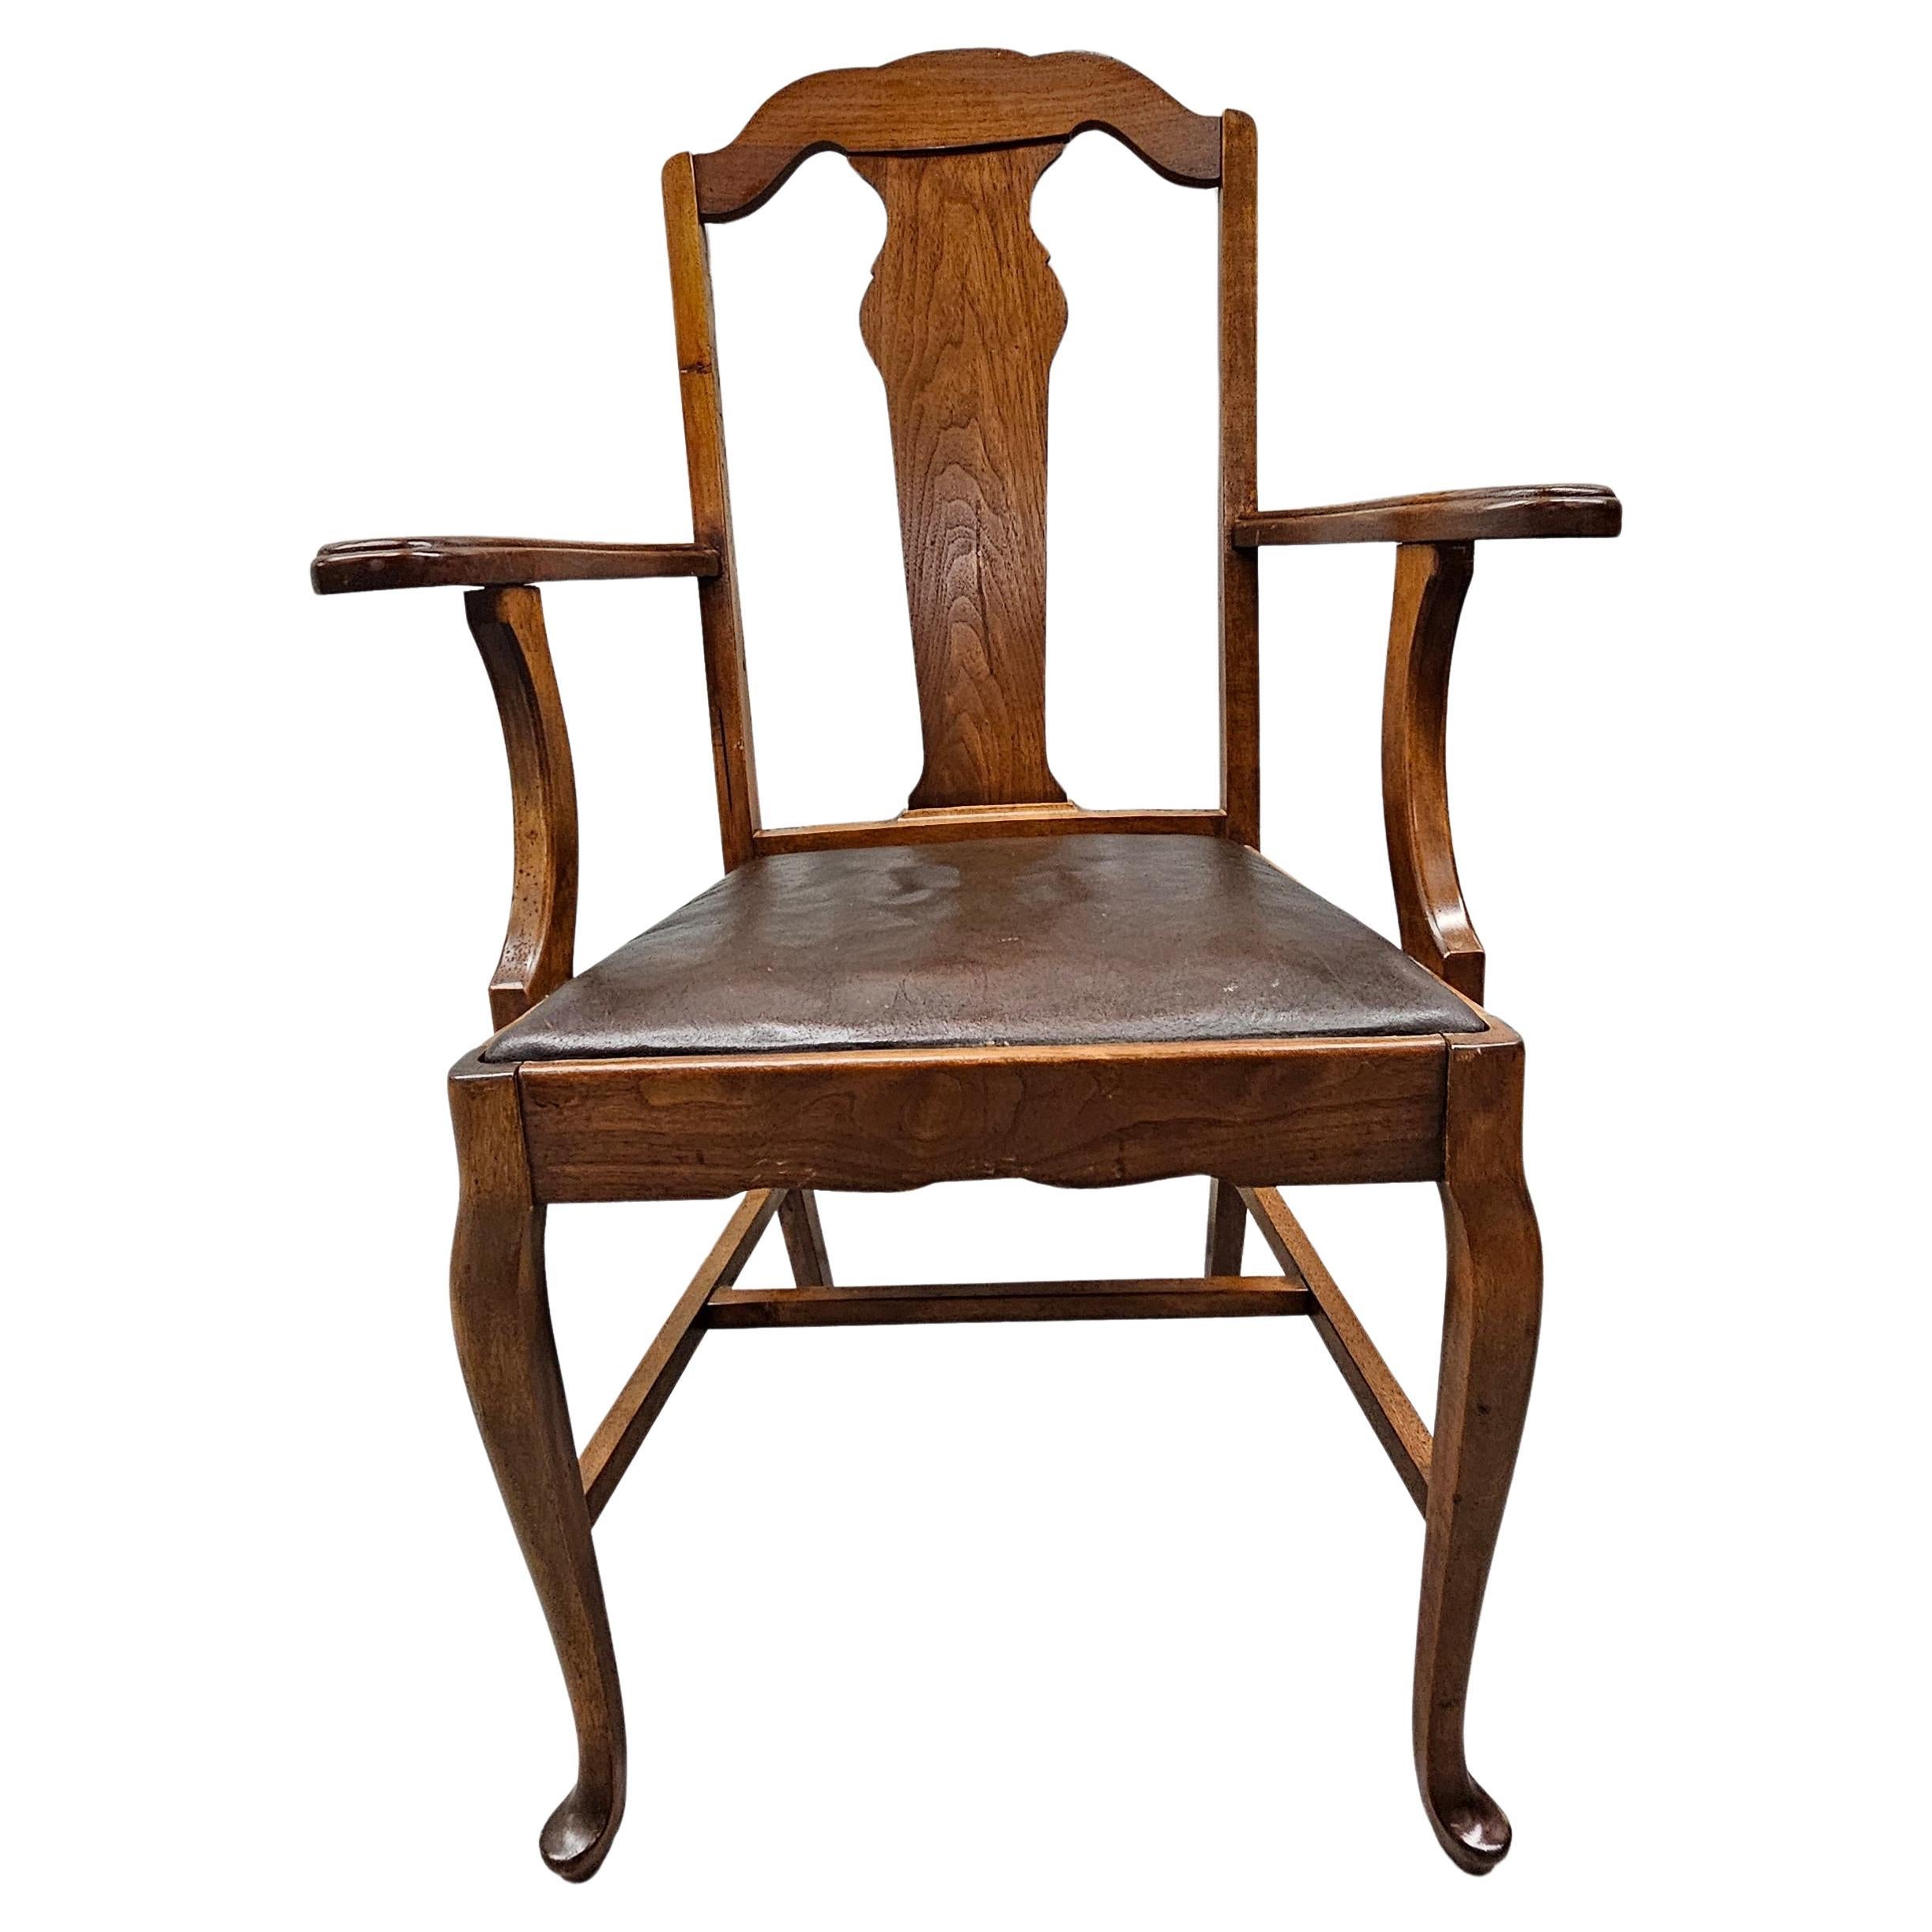 1916 Sikes Furniture Walnut & Leather Upholstered Seat Armchair